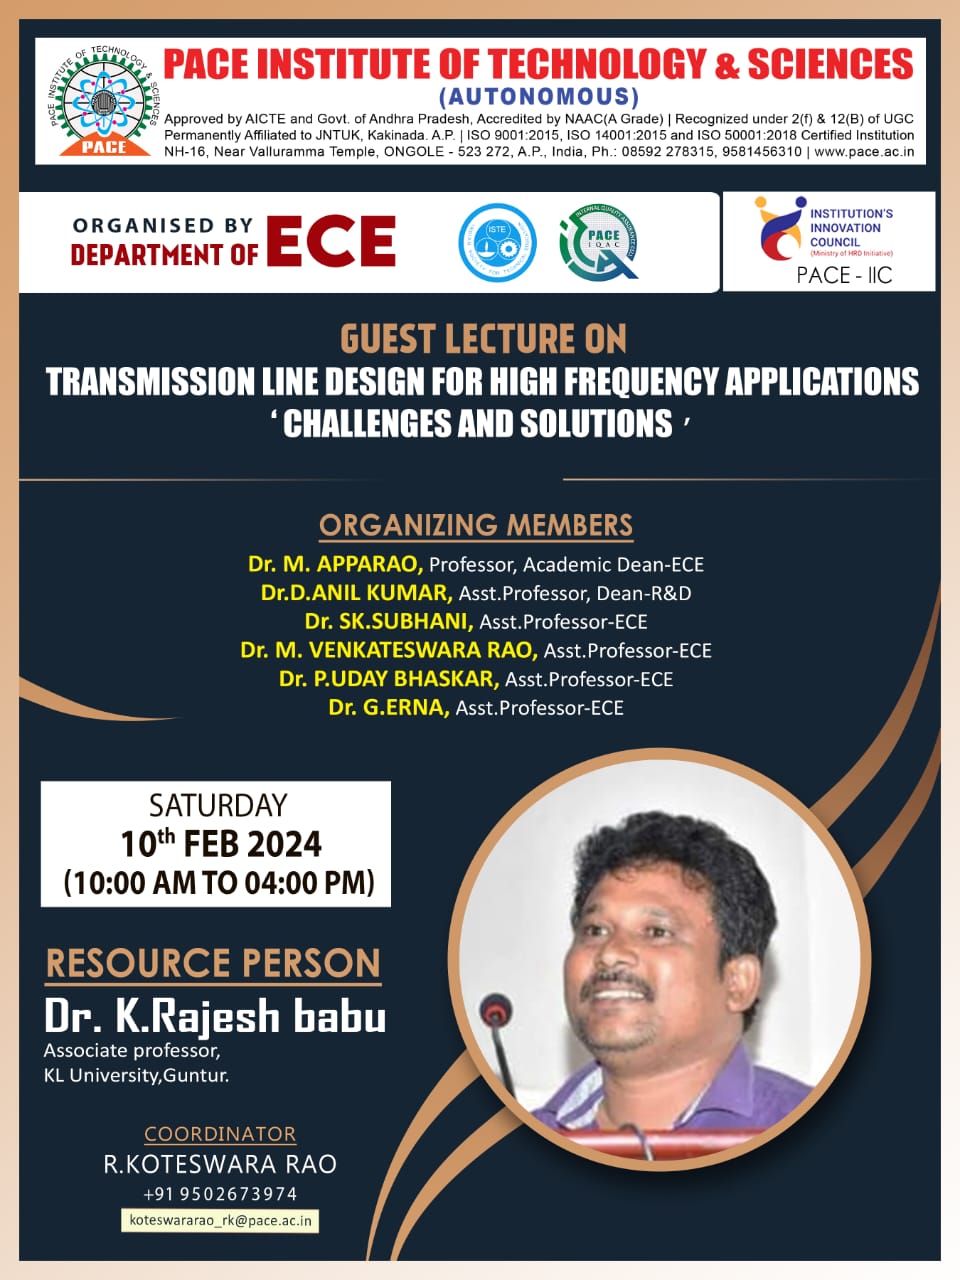 Guest lecture program on Transmission line Design for High frequency Applications